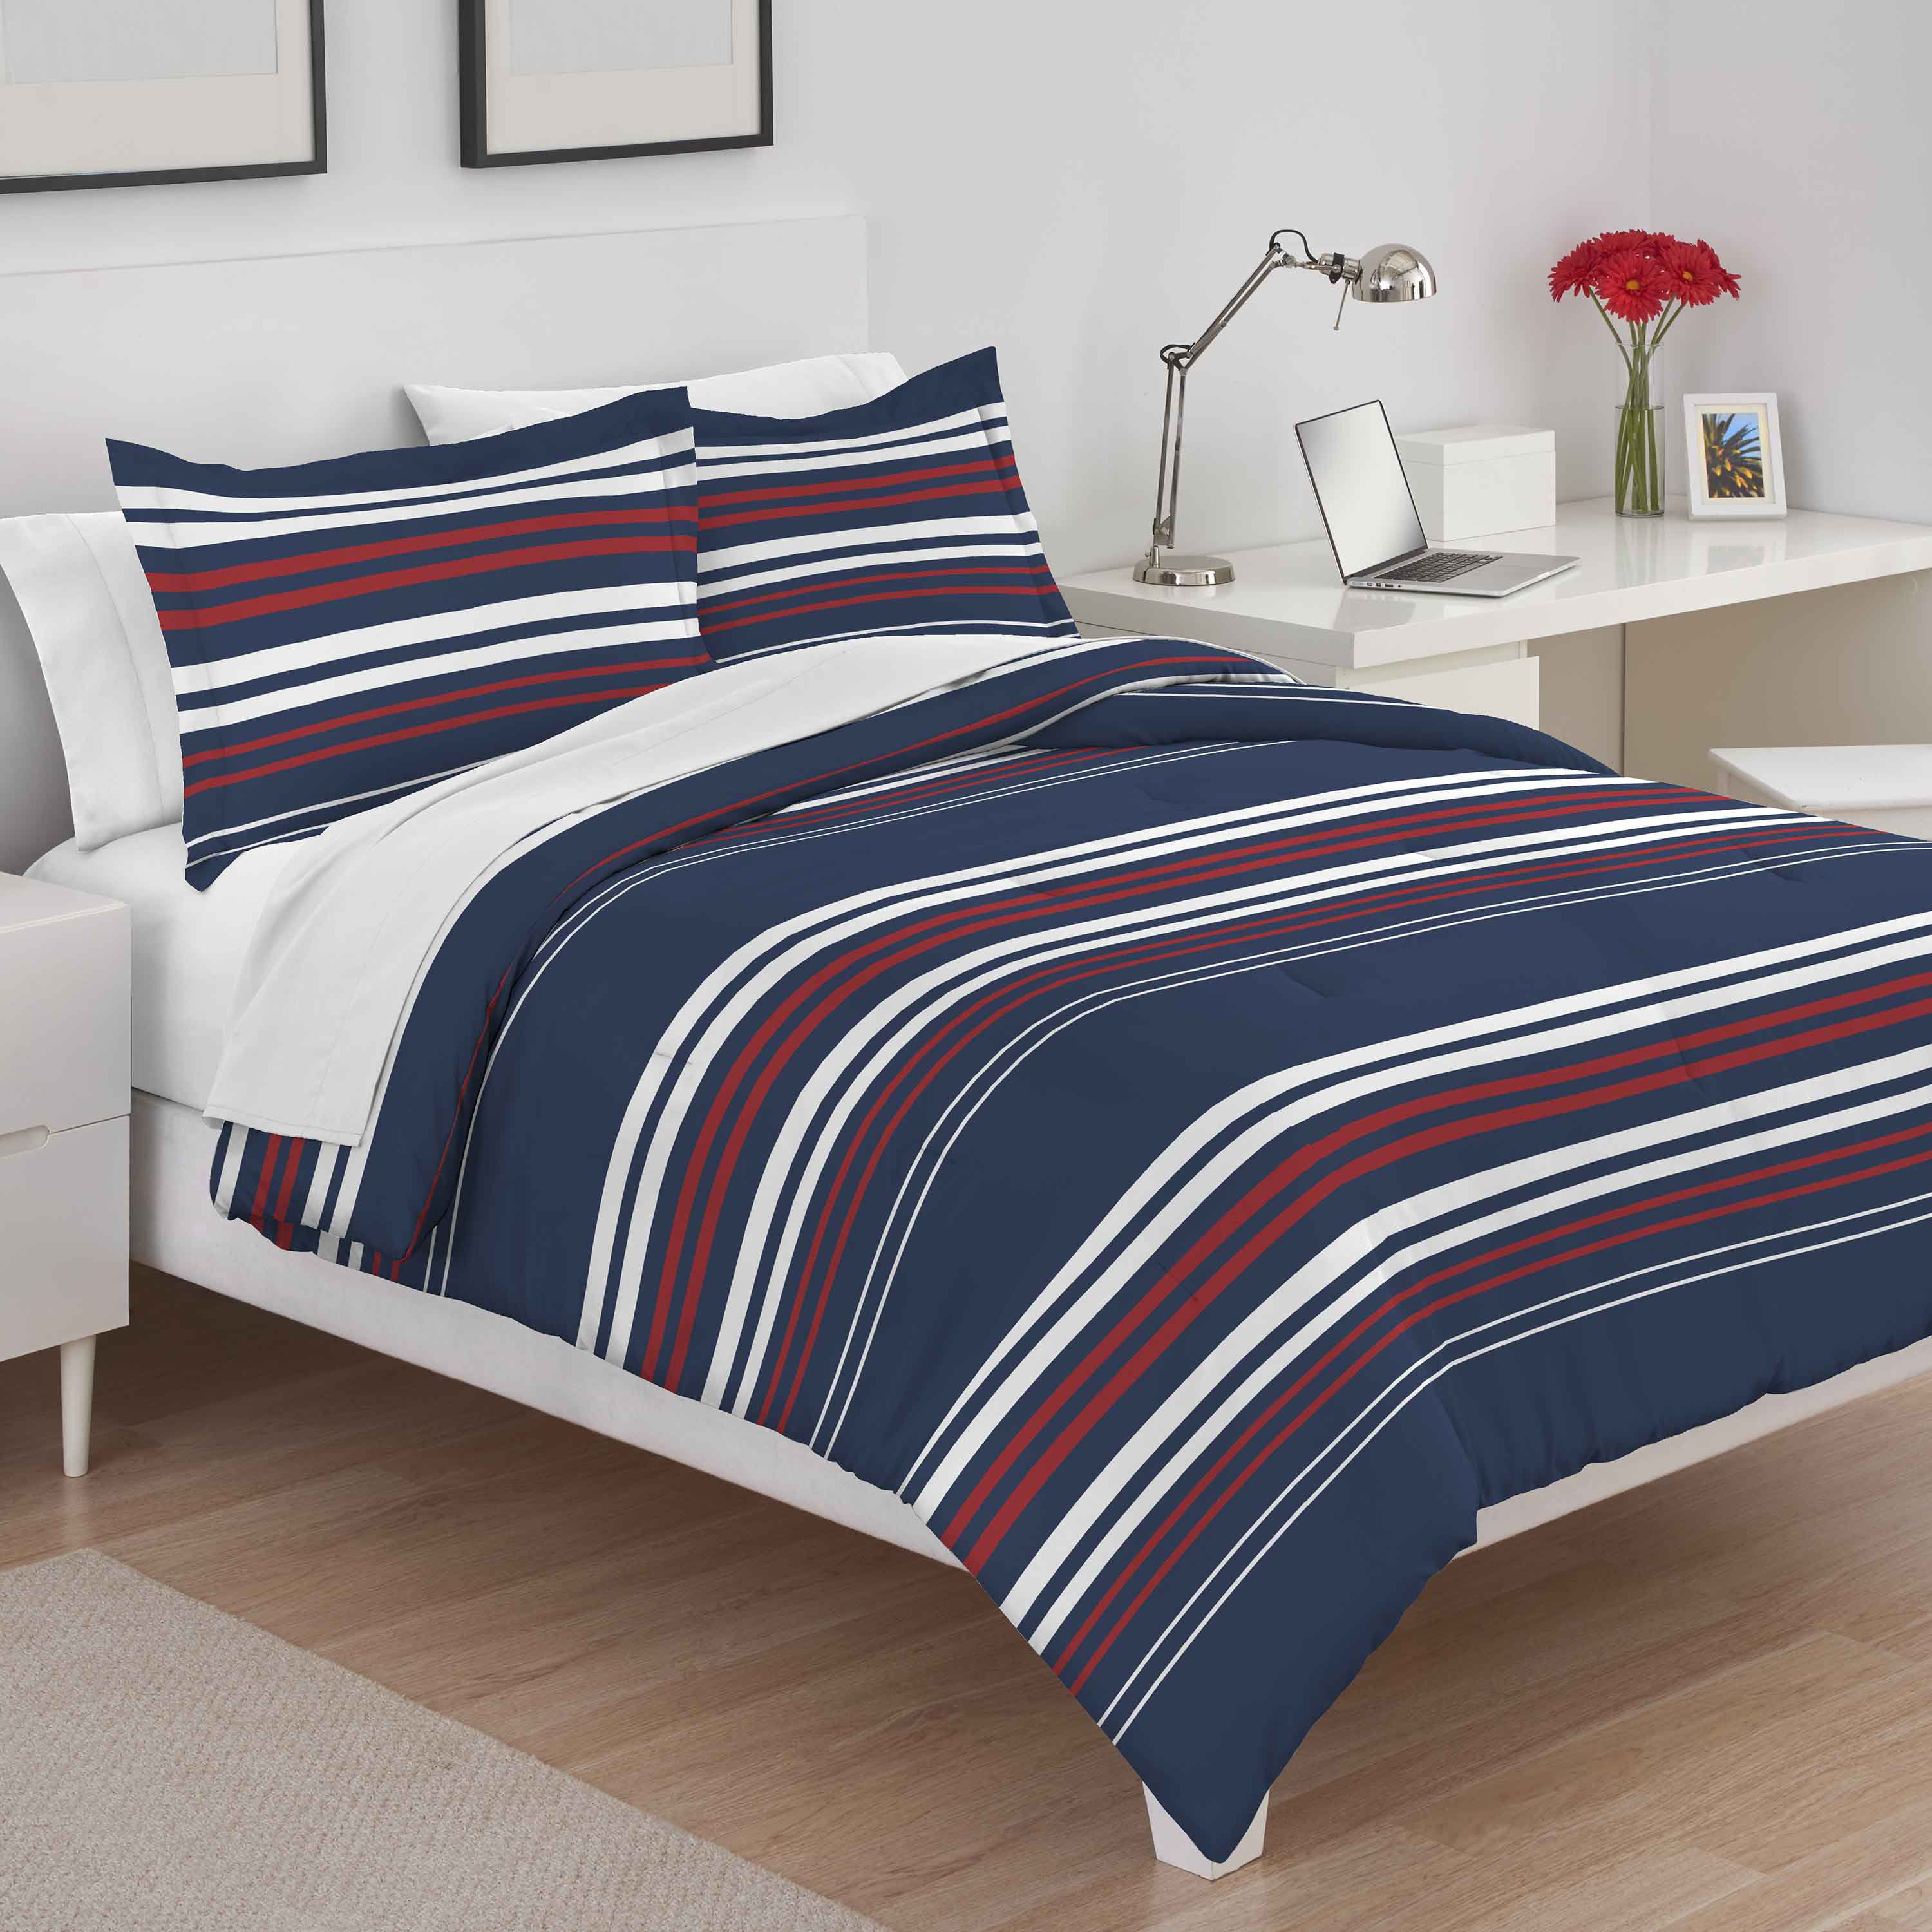 red and blue comforter floral